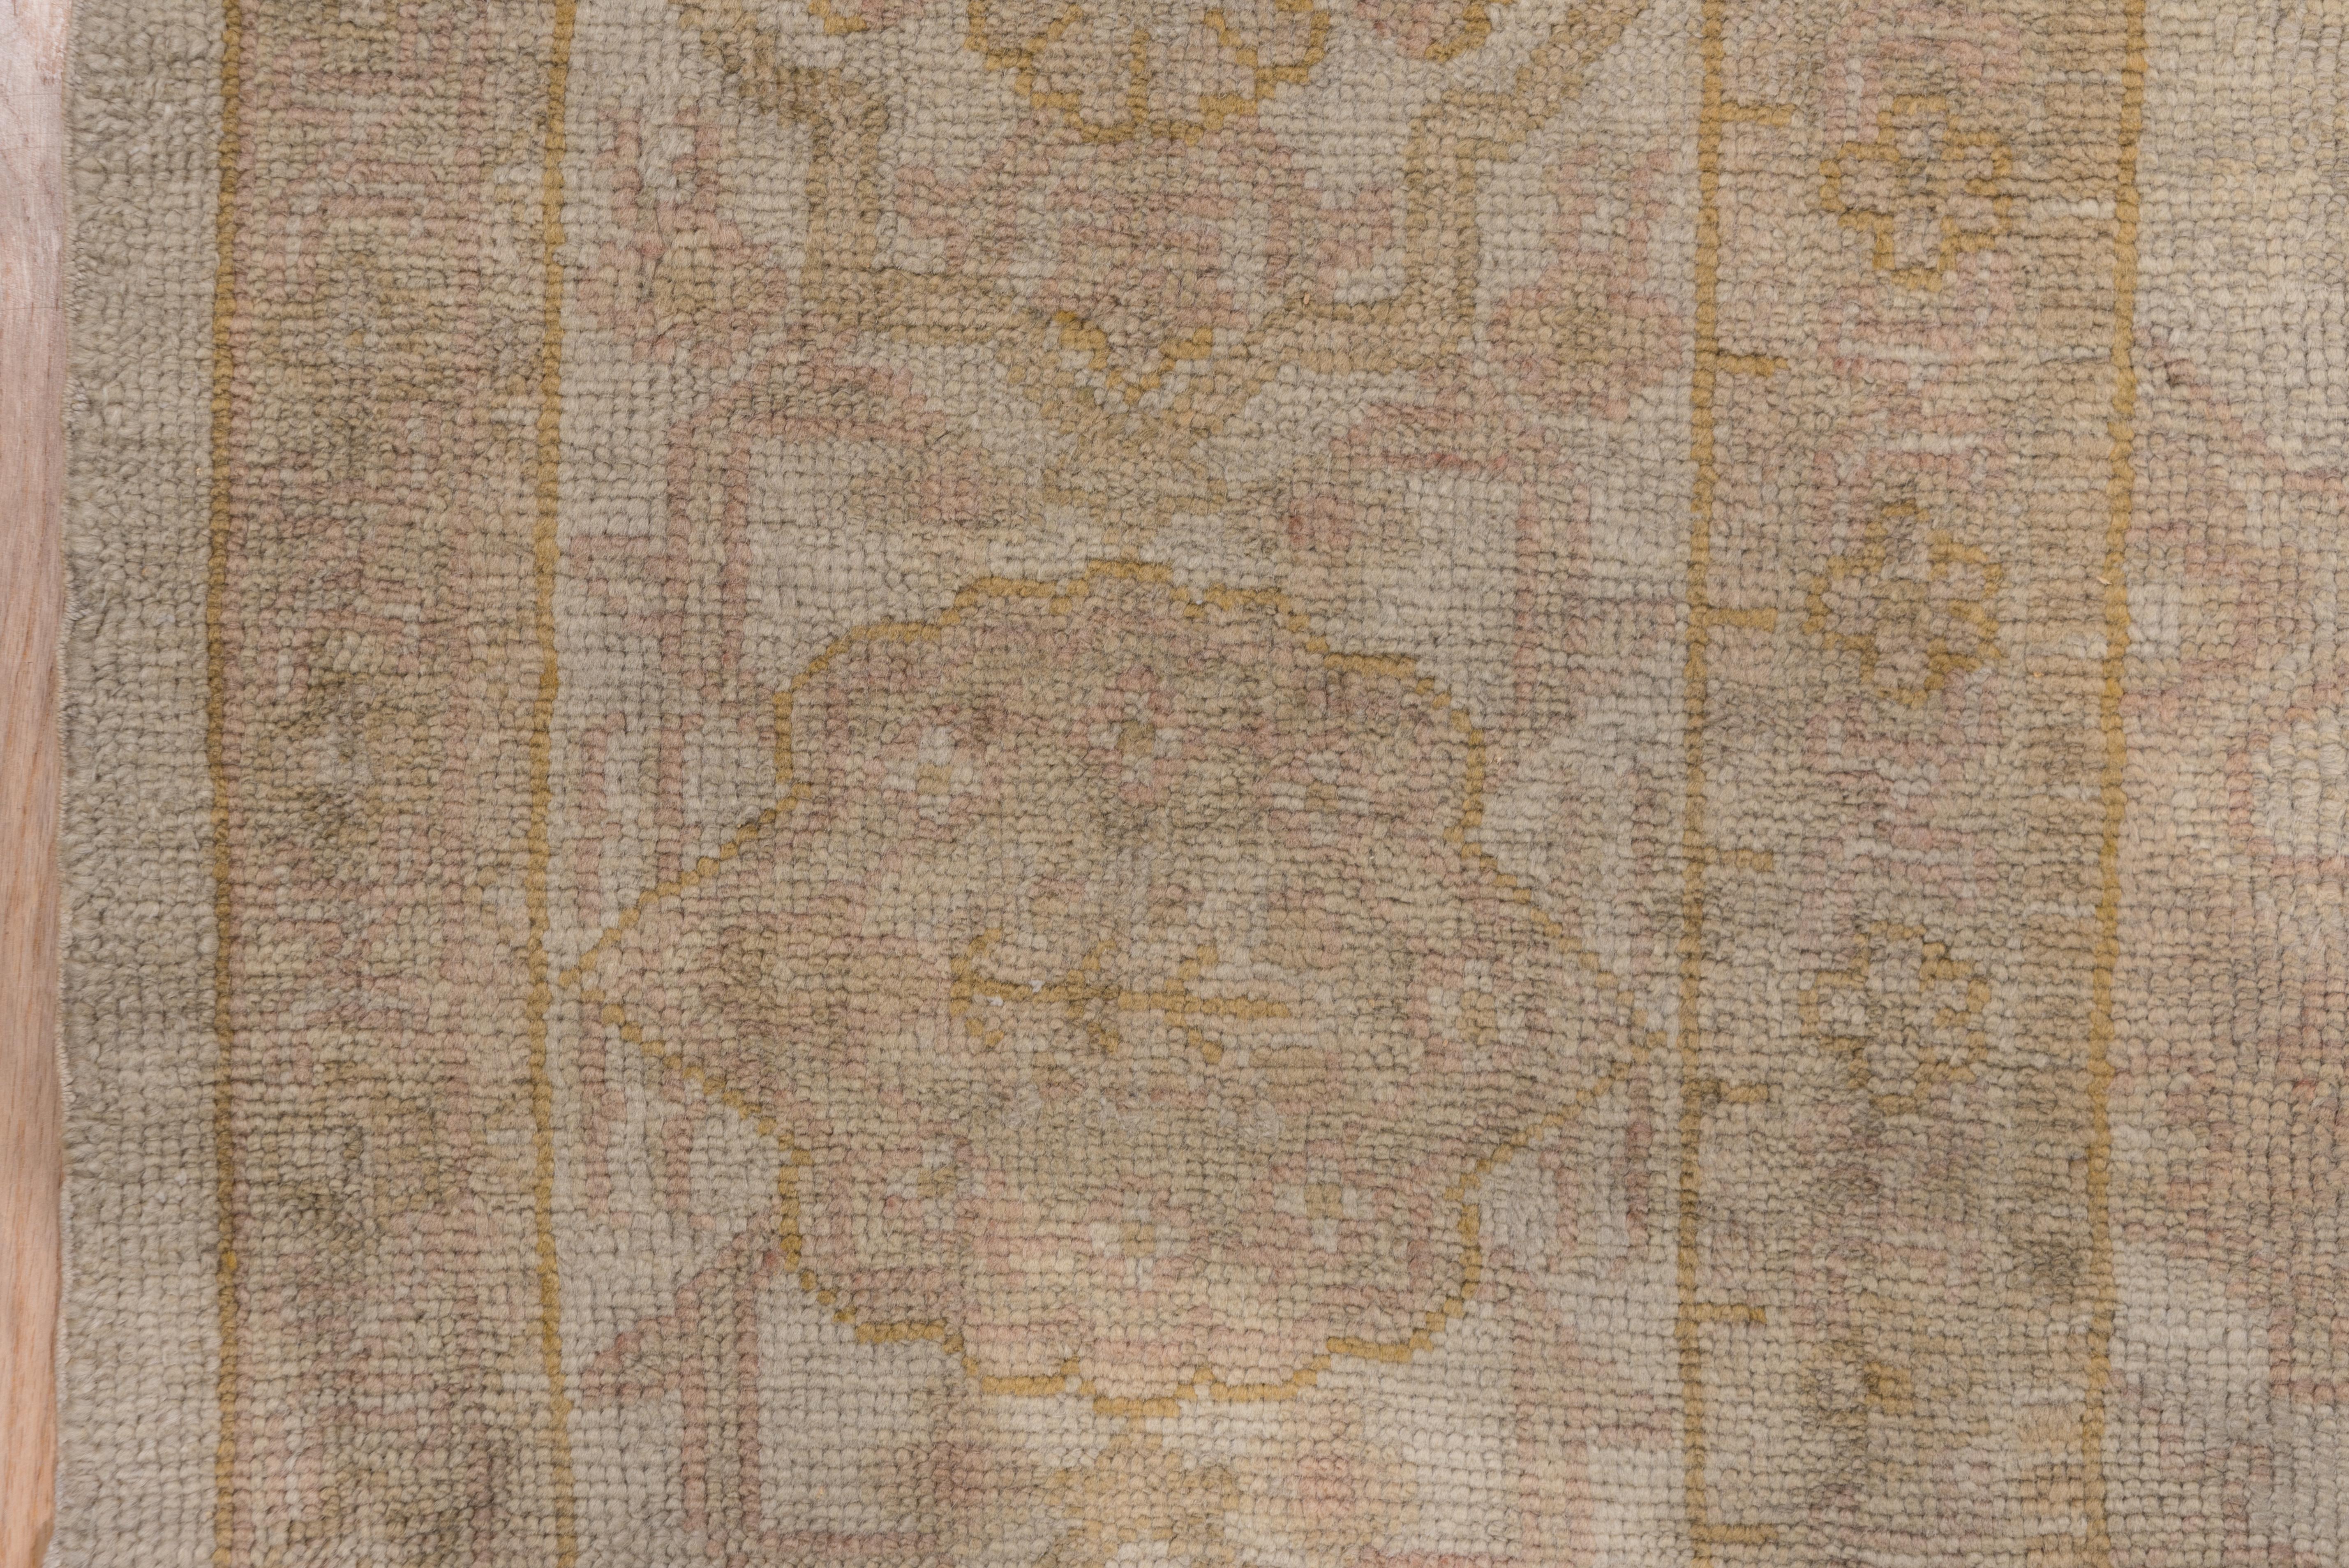 The eggshell old ivory field shows small palmettes and thin connecting systems around a central medallion, set off by the ivory main border with details in mustard gold and light pink. Light medallion outlines make this an allover pattern carpet.